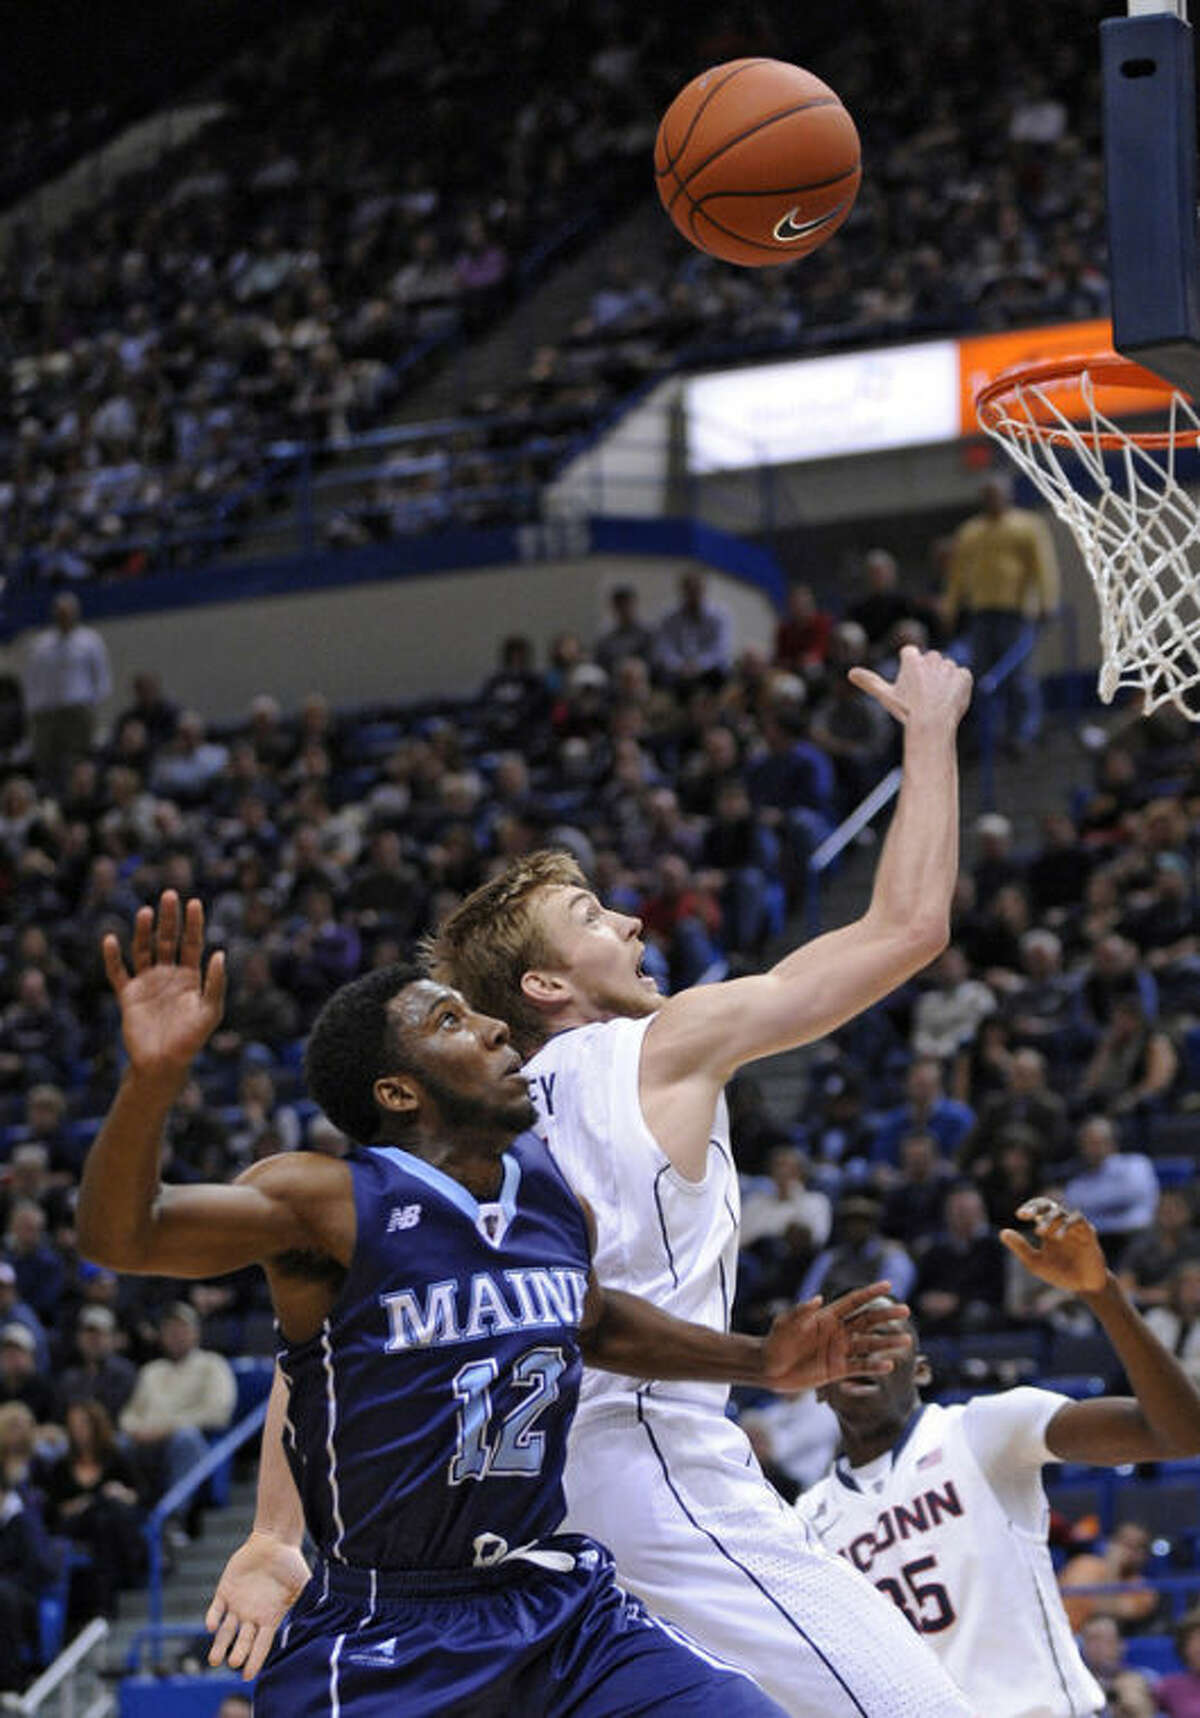 Connecticut's Niels Giffey (5) and Maine's Xavier Pollard (12) fight for a rebound during the first half of an NCAA college basketball game, in Hartford, Conn., on Friday, Dec. 6, 2013. (AP Photo/Fred Beckham)